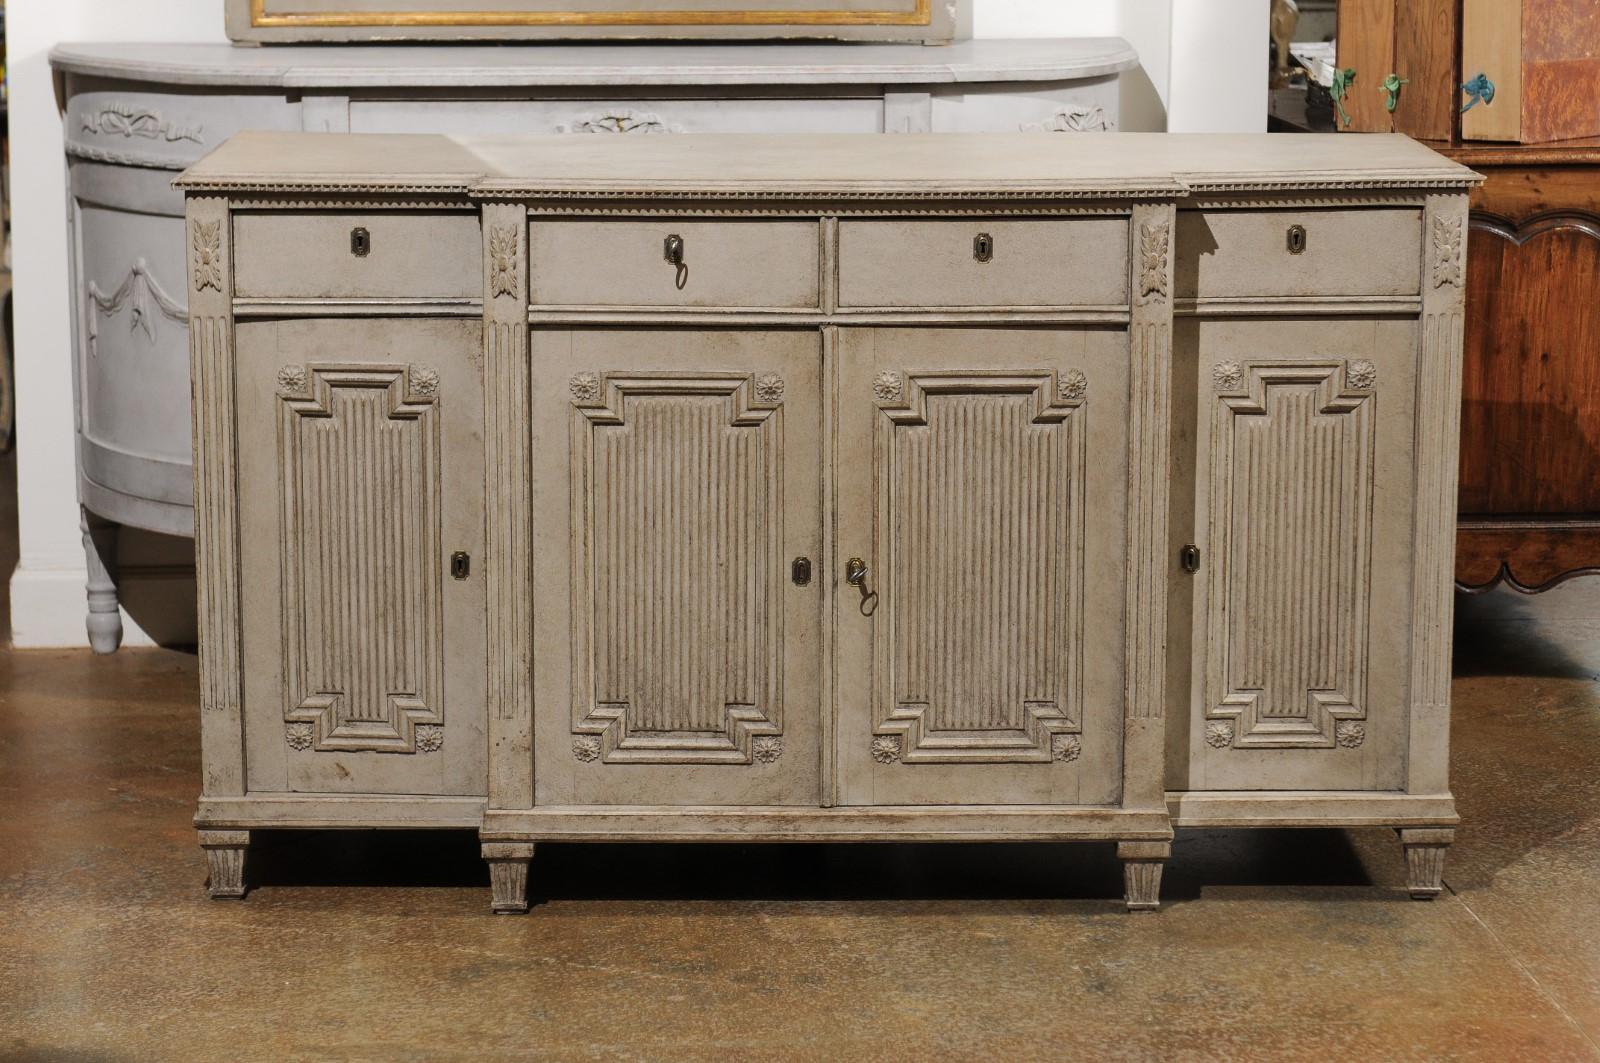 A Swedish Gustavian style painted wood breakfront sideboard from the 19th century, with dentil molding, fluted accents and carved rosettes. Born in Sweden during the 19th century, this stunning sideboard features a rectangular top with protruding